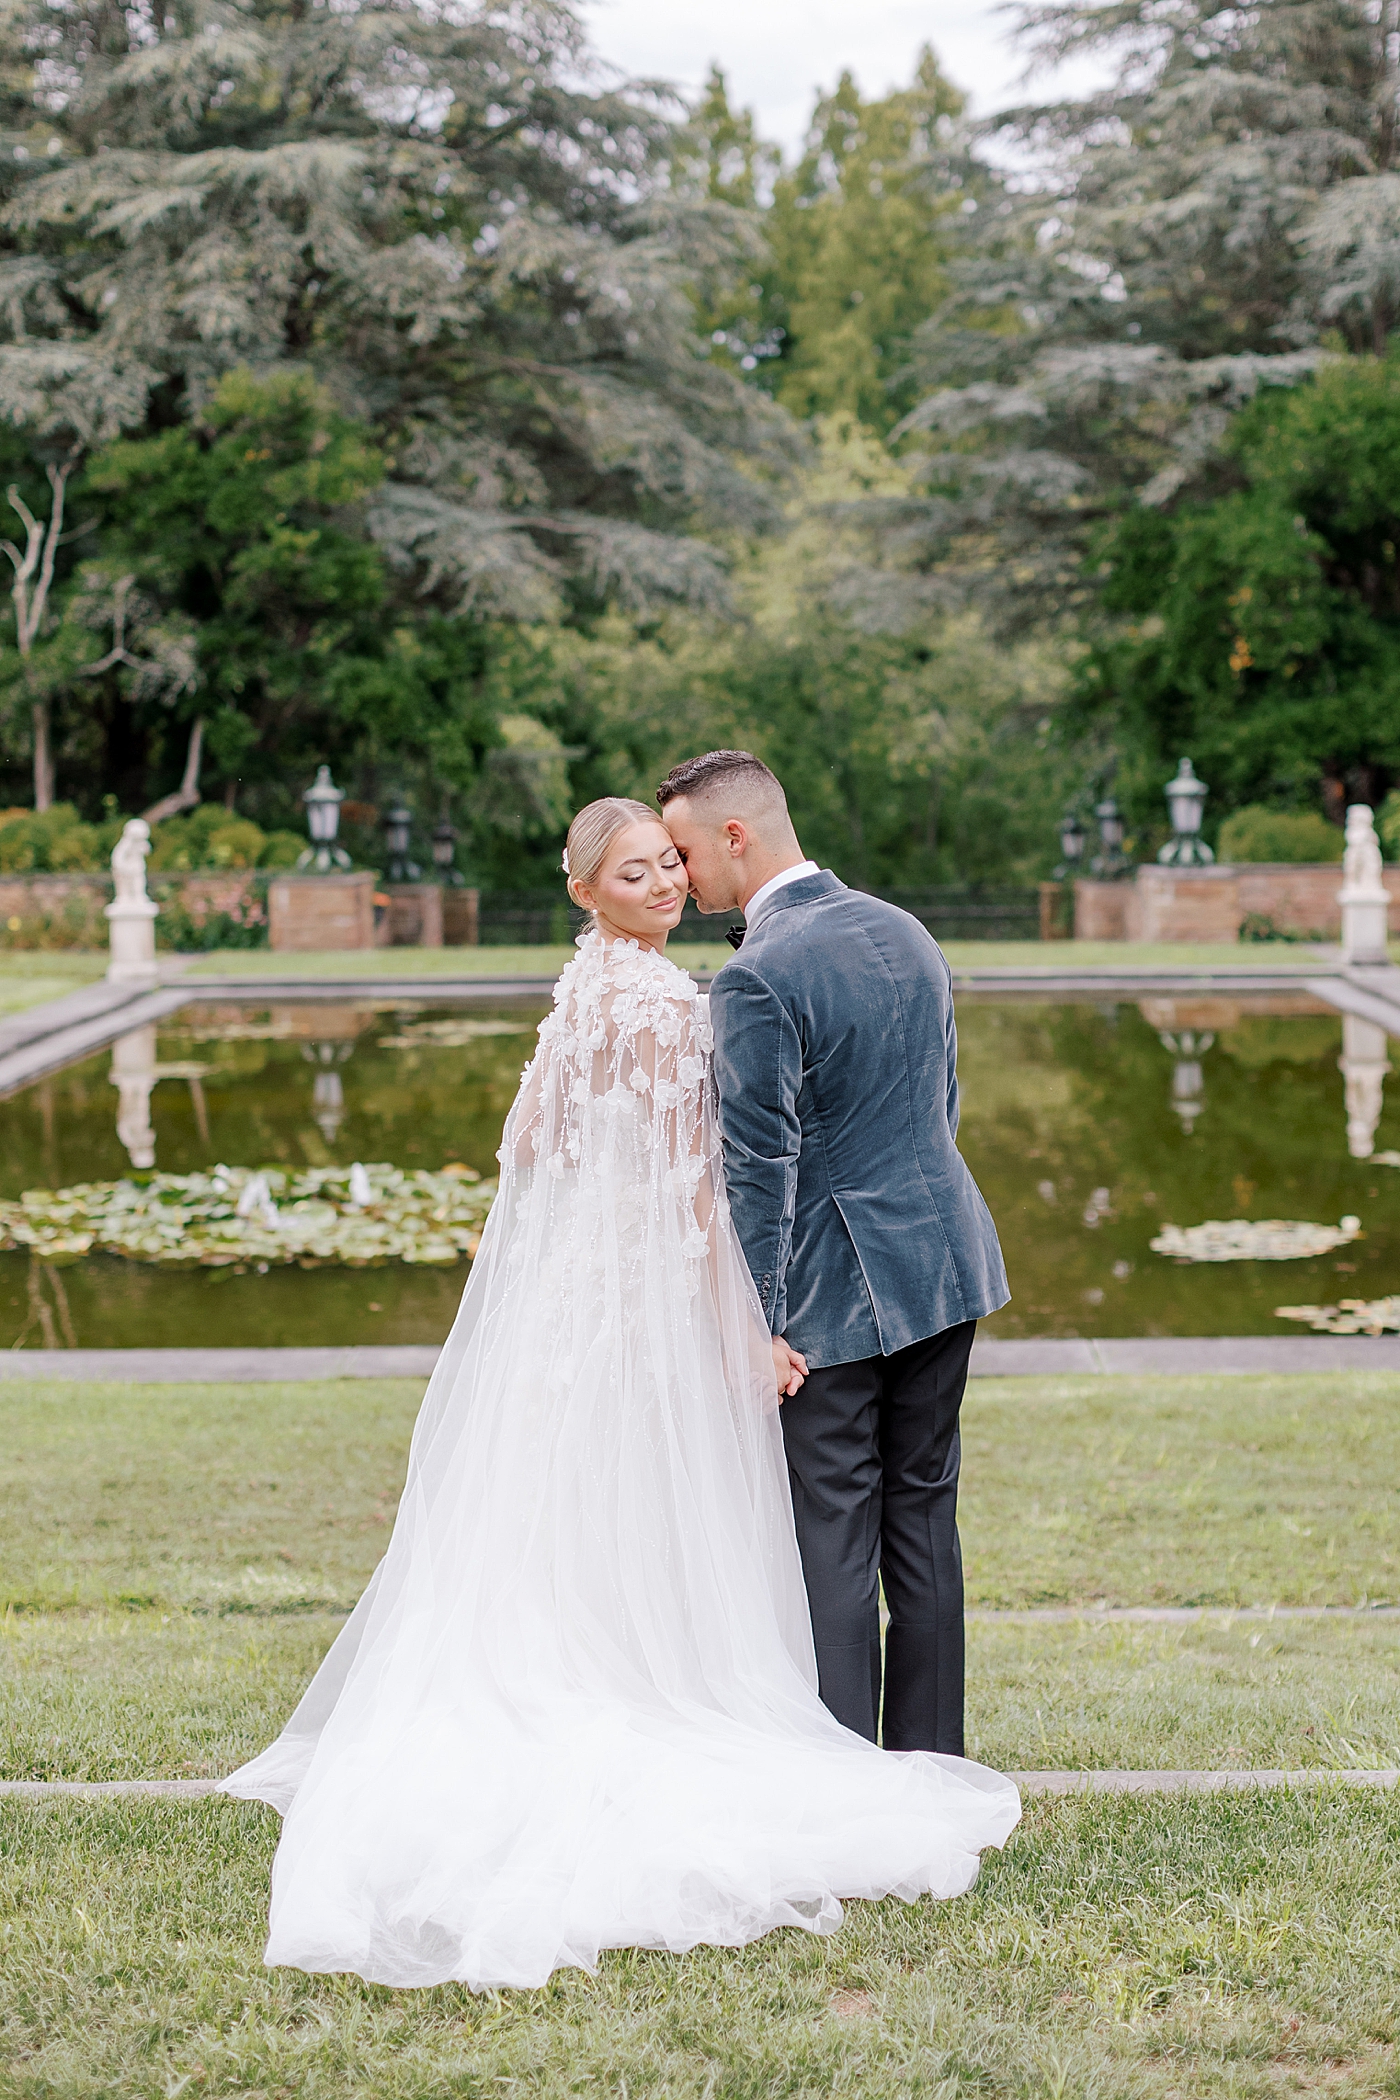 Bride and groom snuggling near a pond | Image by Hope Helmuth Photography